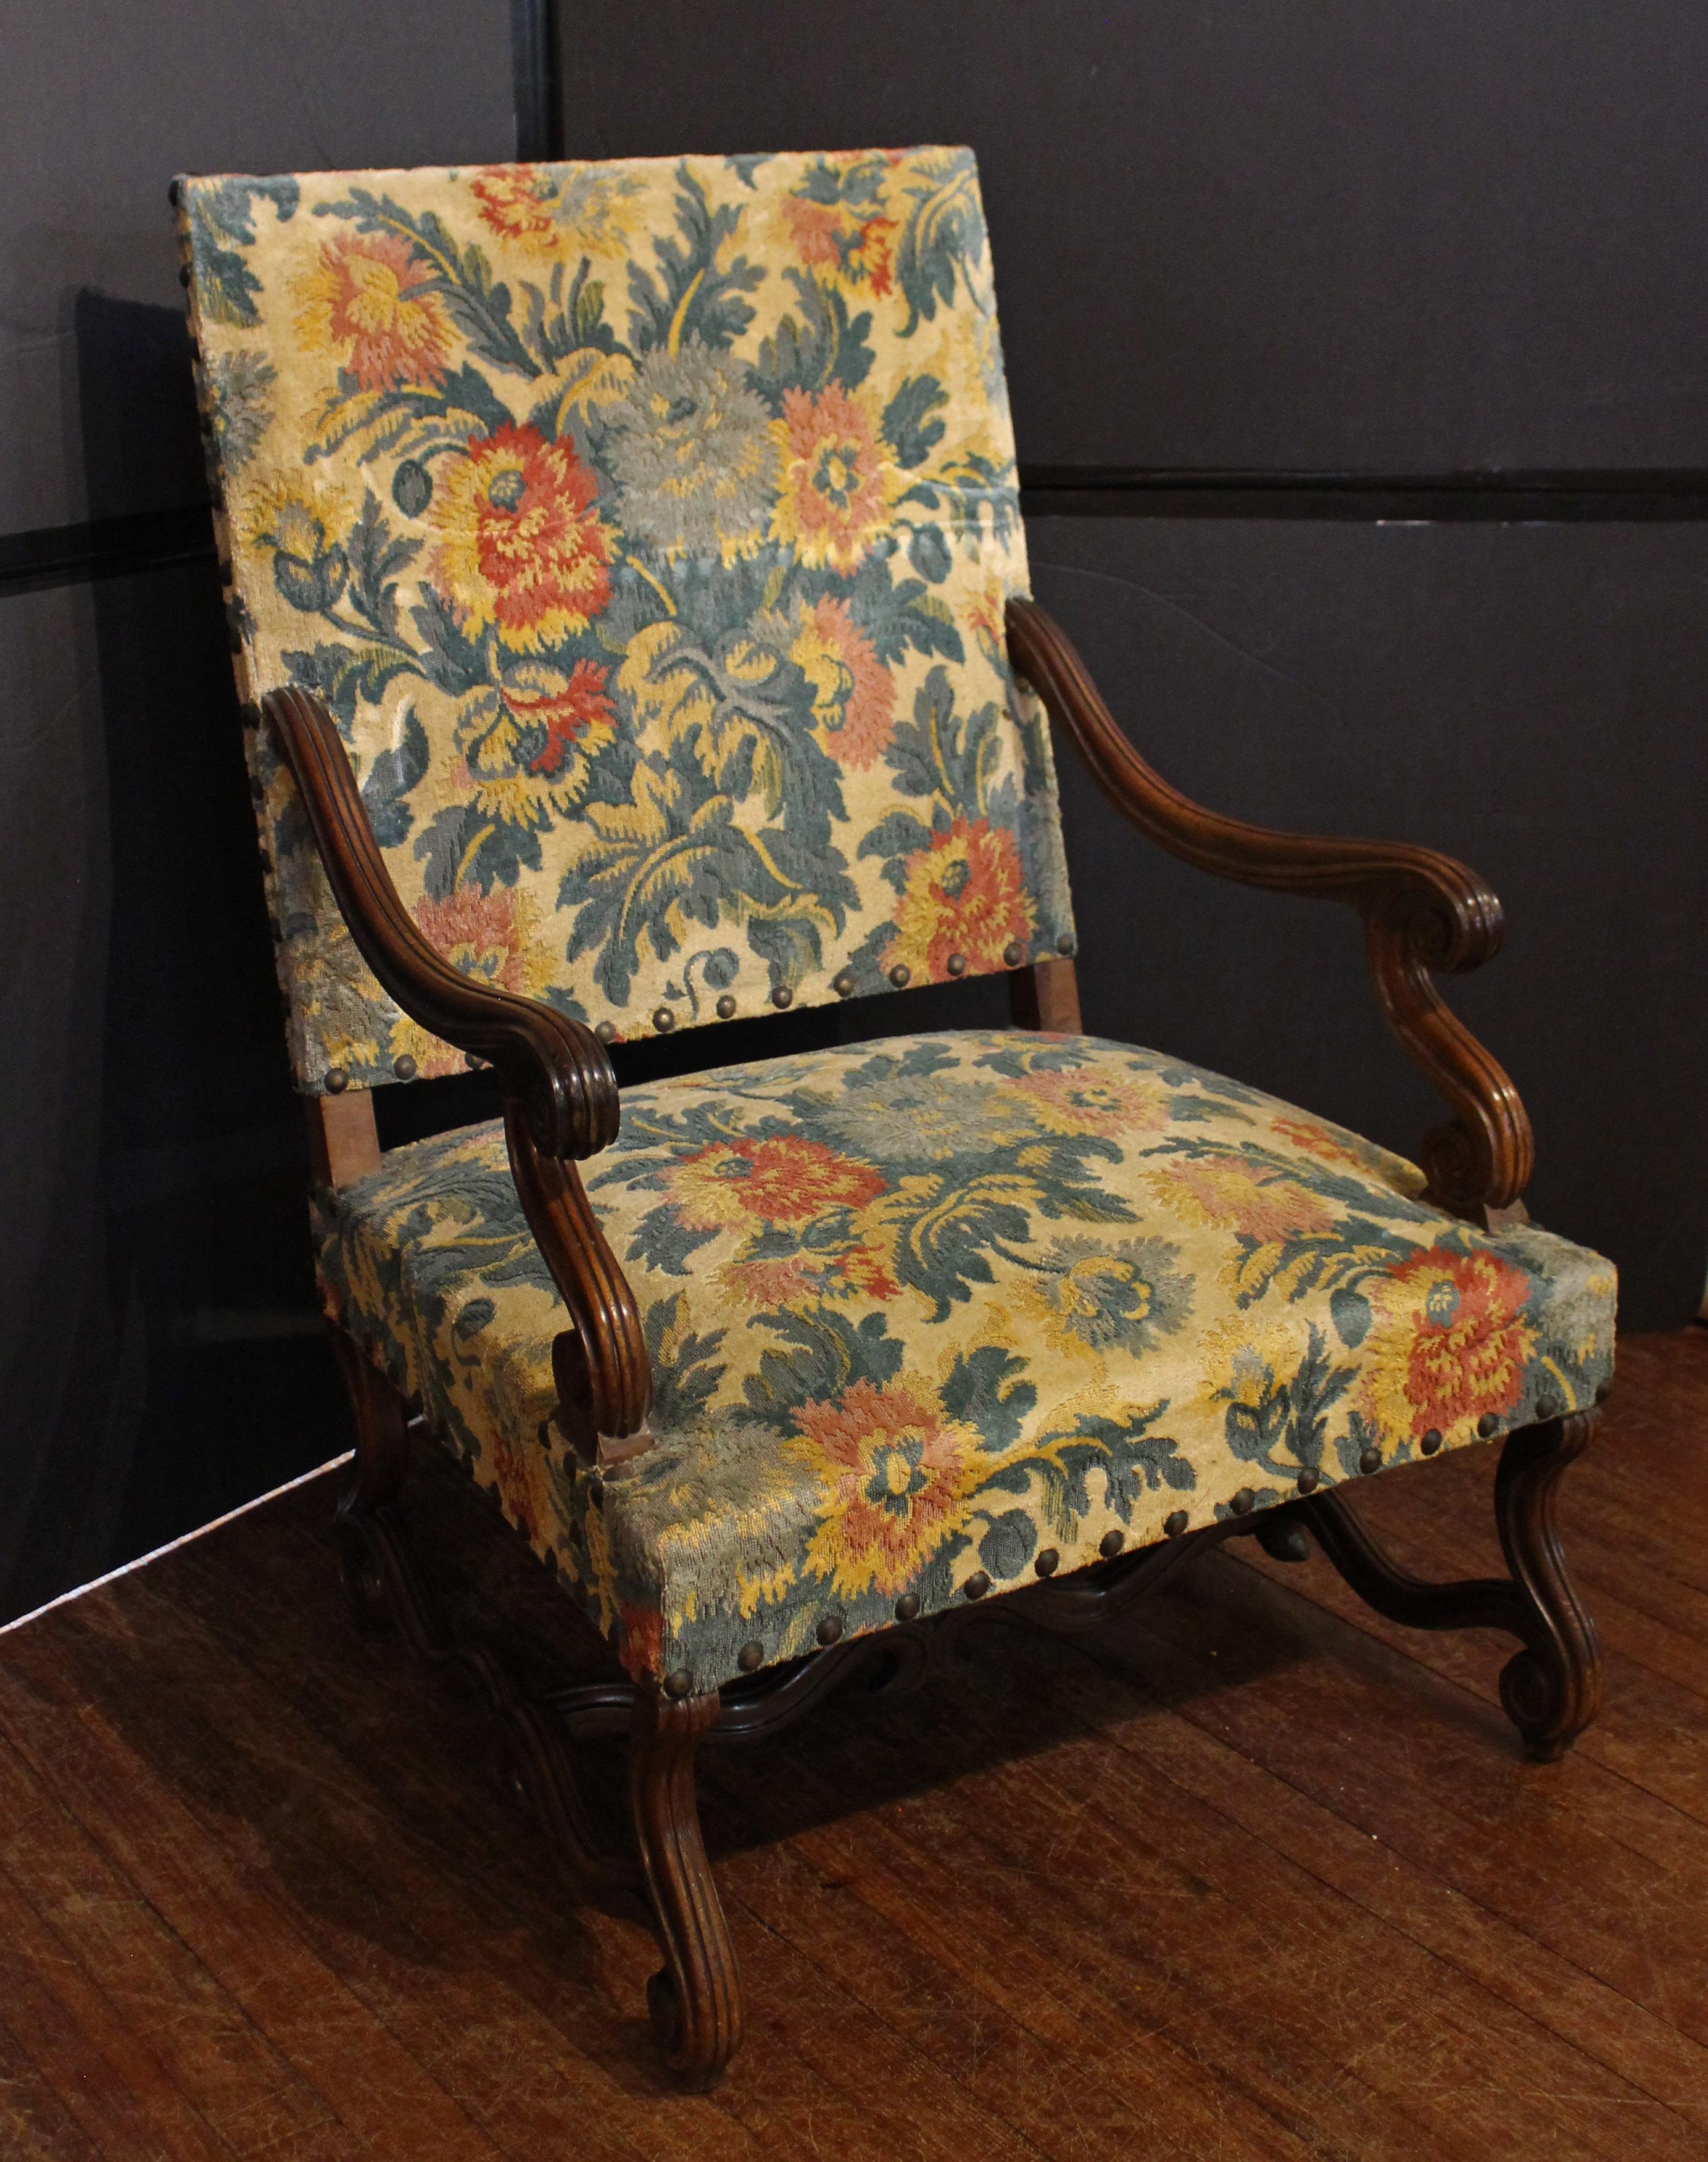 Circa 1870 grand scale Regence style fauteuil, French. Walnut. Well molded throughout, S-scroll arms & legs, with shaped stretcher base. Wonderful old as found French upholstery. 27 3/4